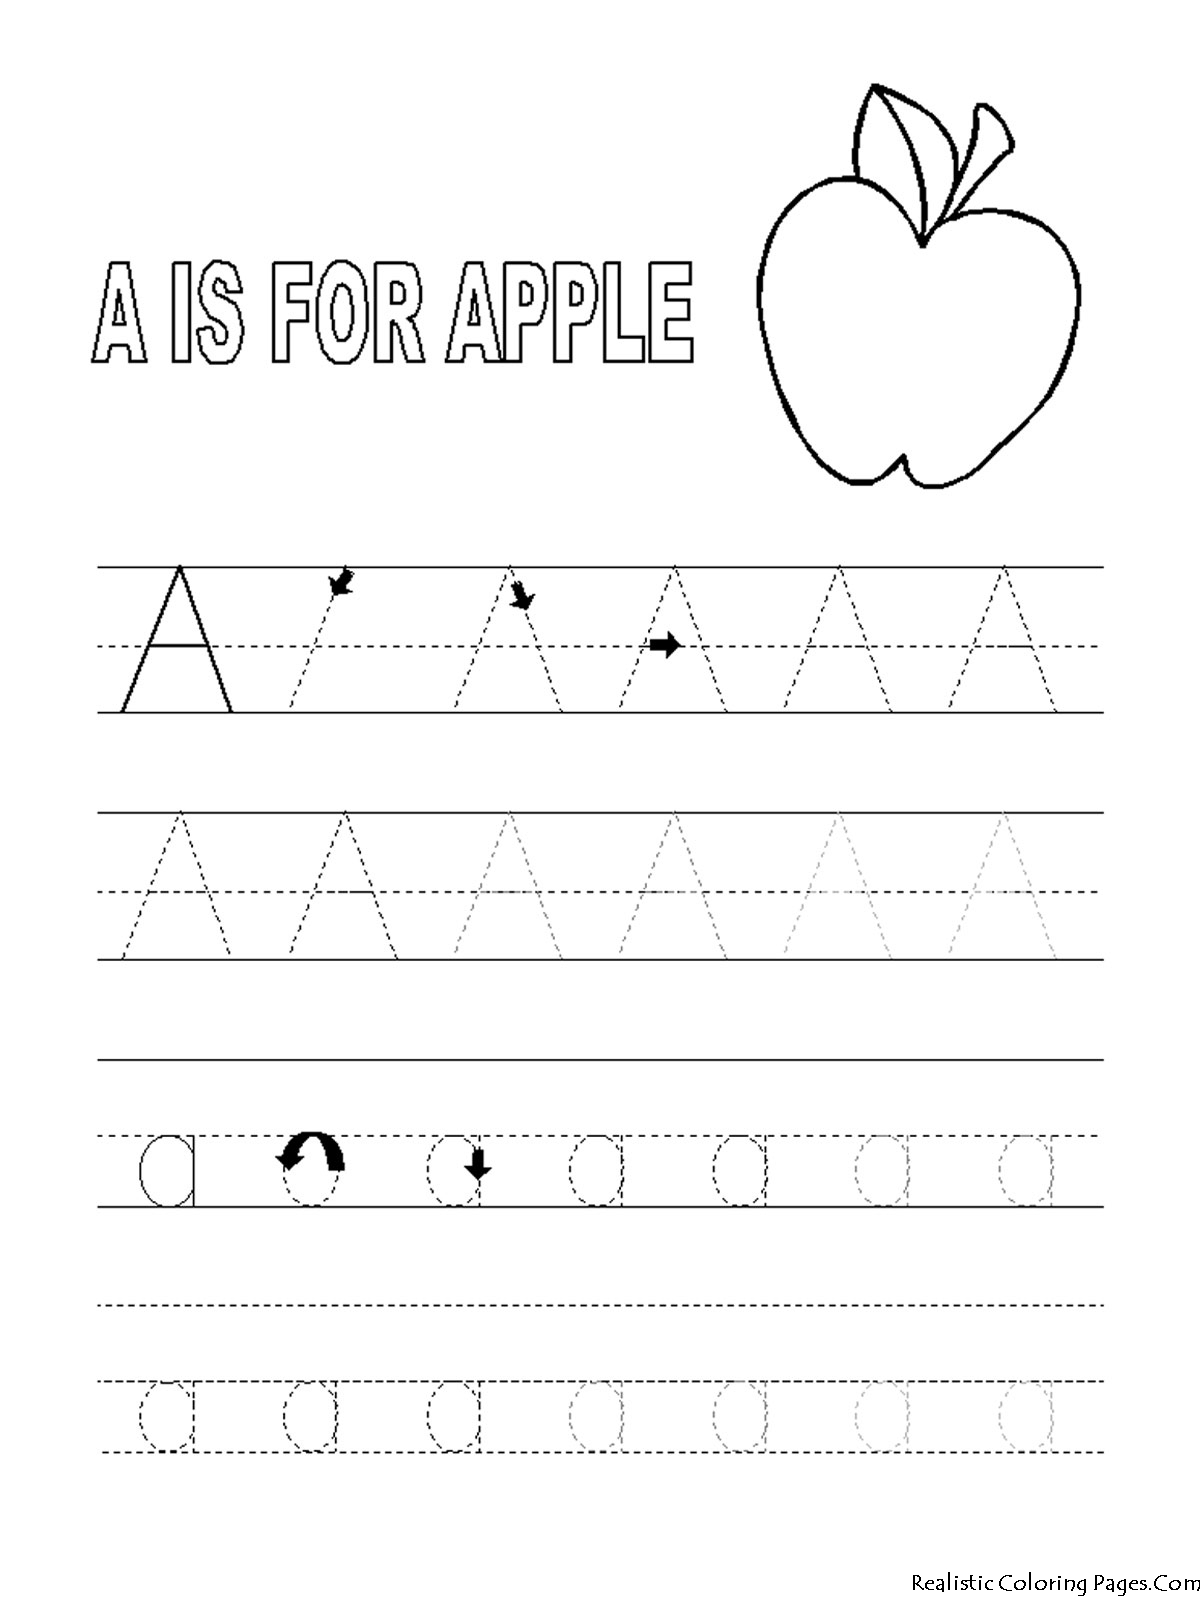 Download A Letters Alphabet Coloring Pages | Realistic Coloring Pages